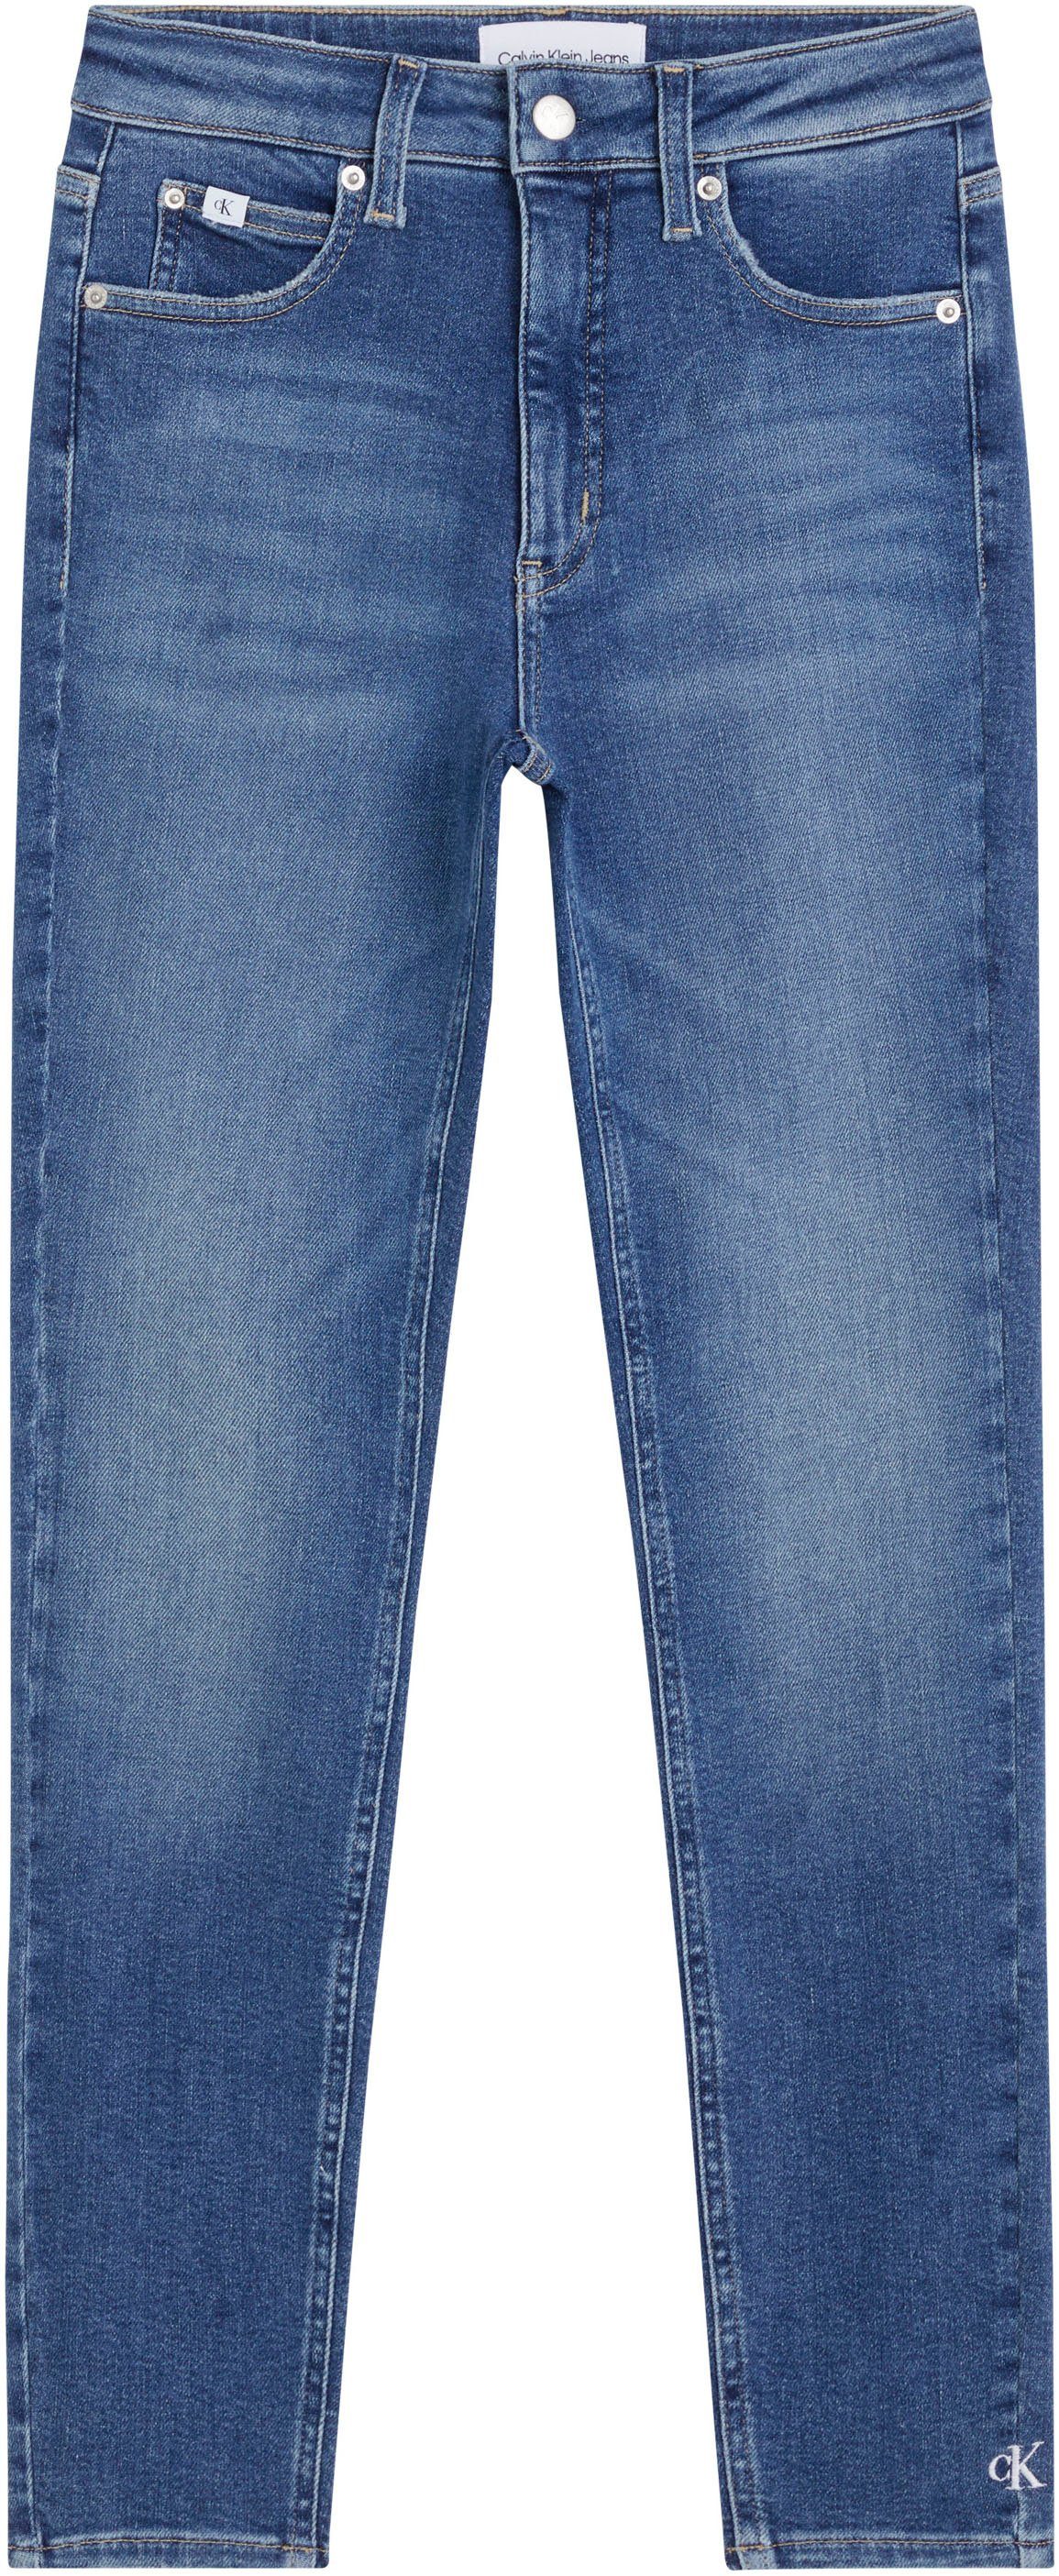 Calvin Klein RISE SUPER Jeans ANKLE HIGH Ankle-Jeans SKINNY